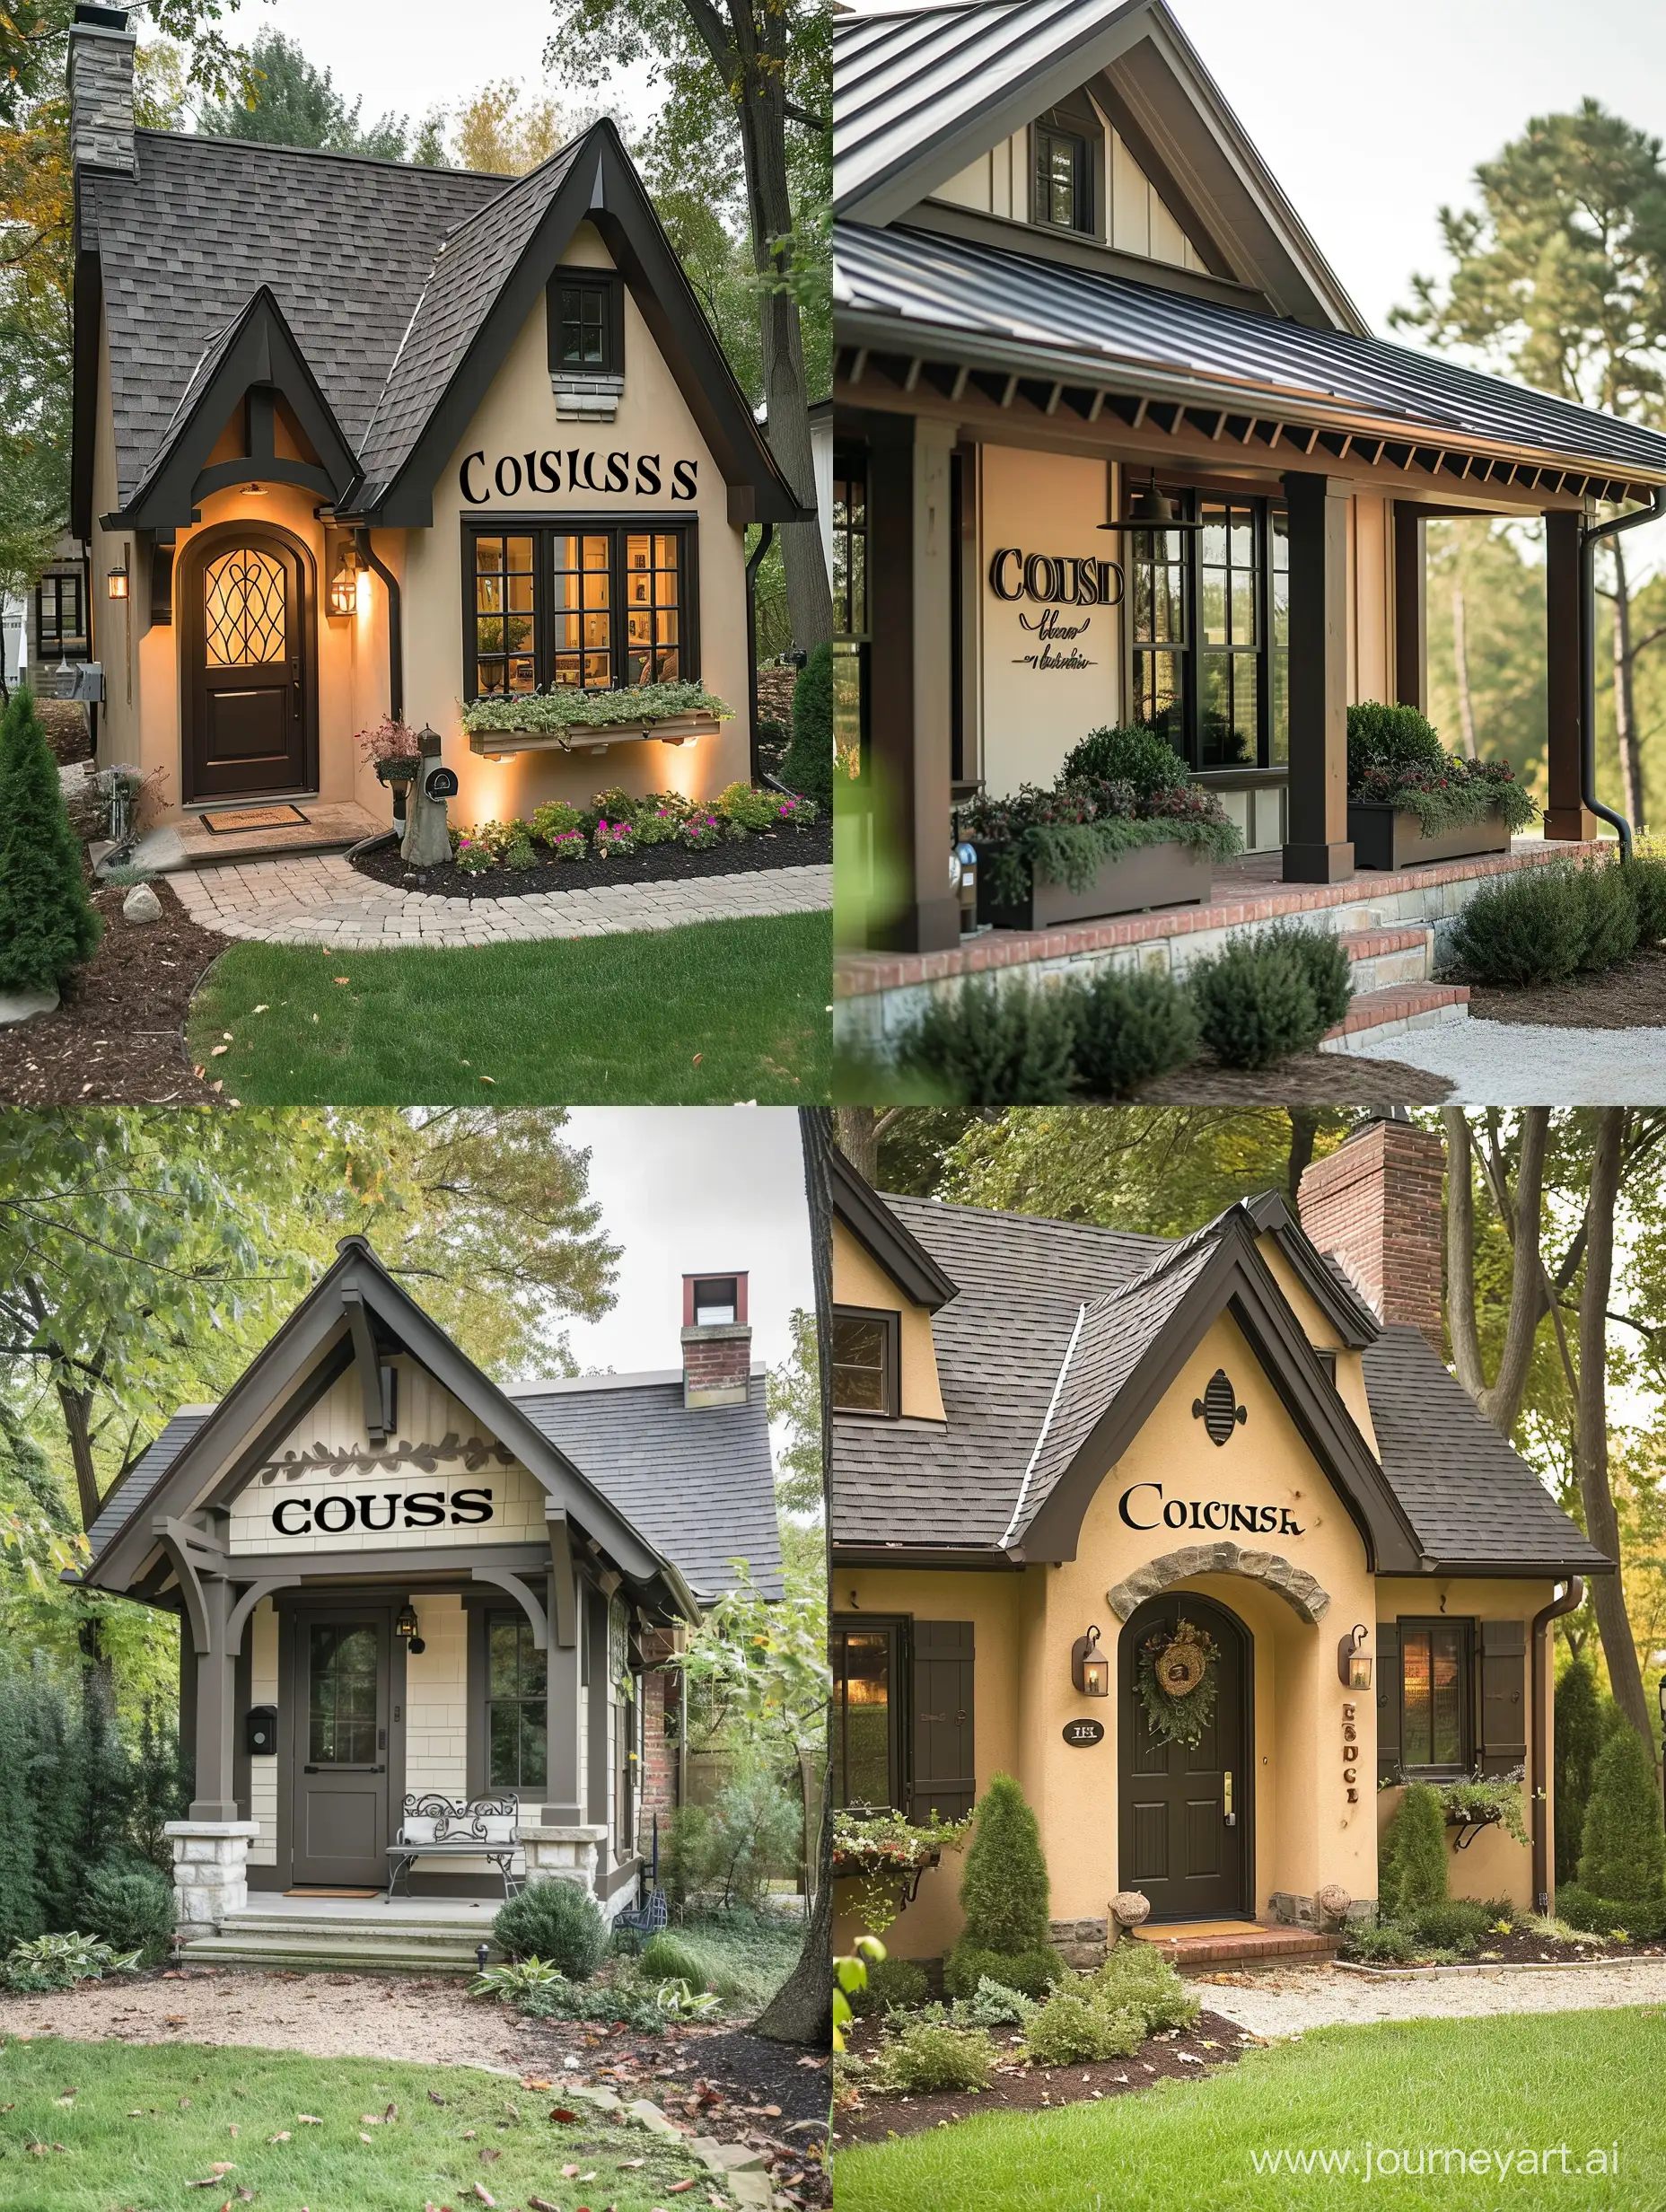 Charming-Small-House-with-Elegant-Roofing-and-Custom-Collins-Name